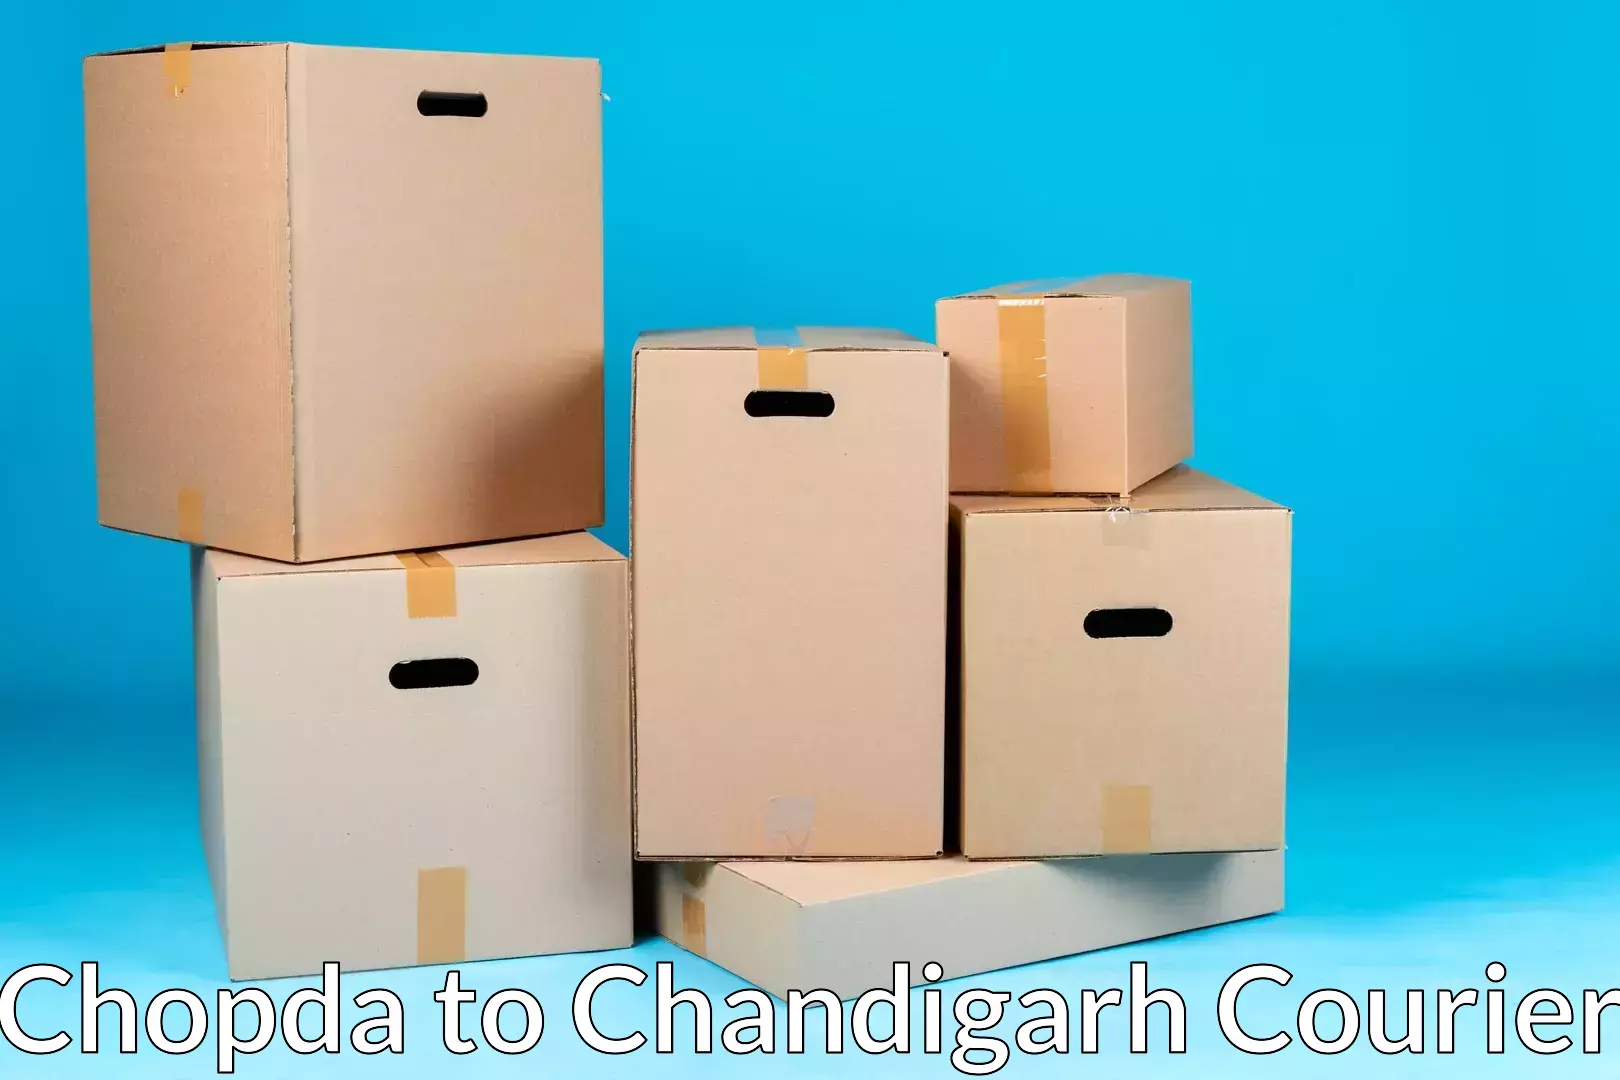 Specialized moving company Chopda to Chandigarh